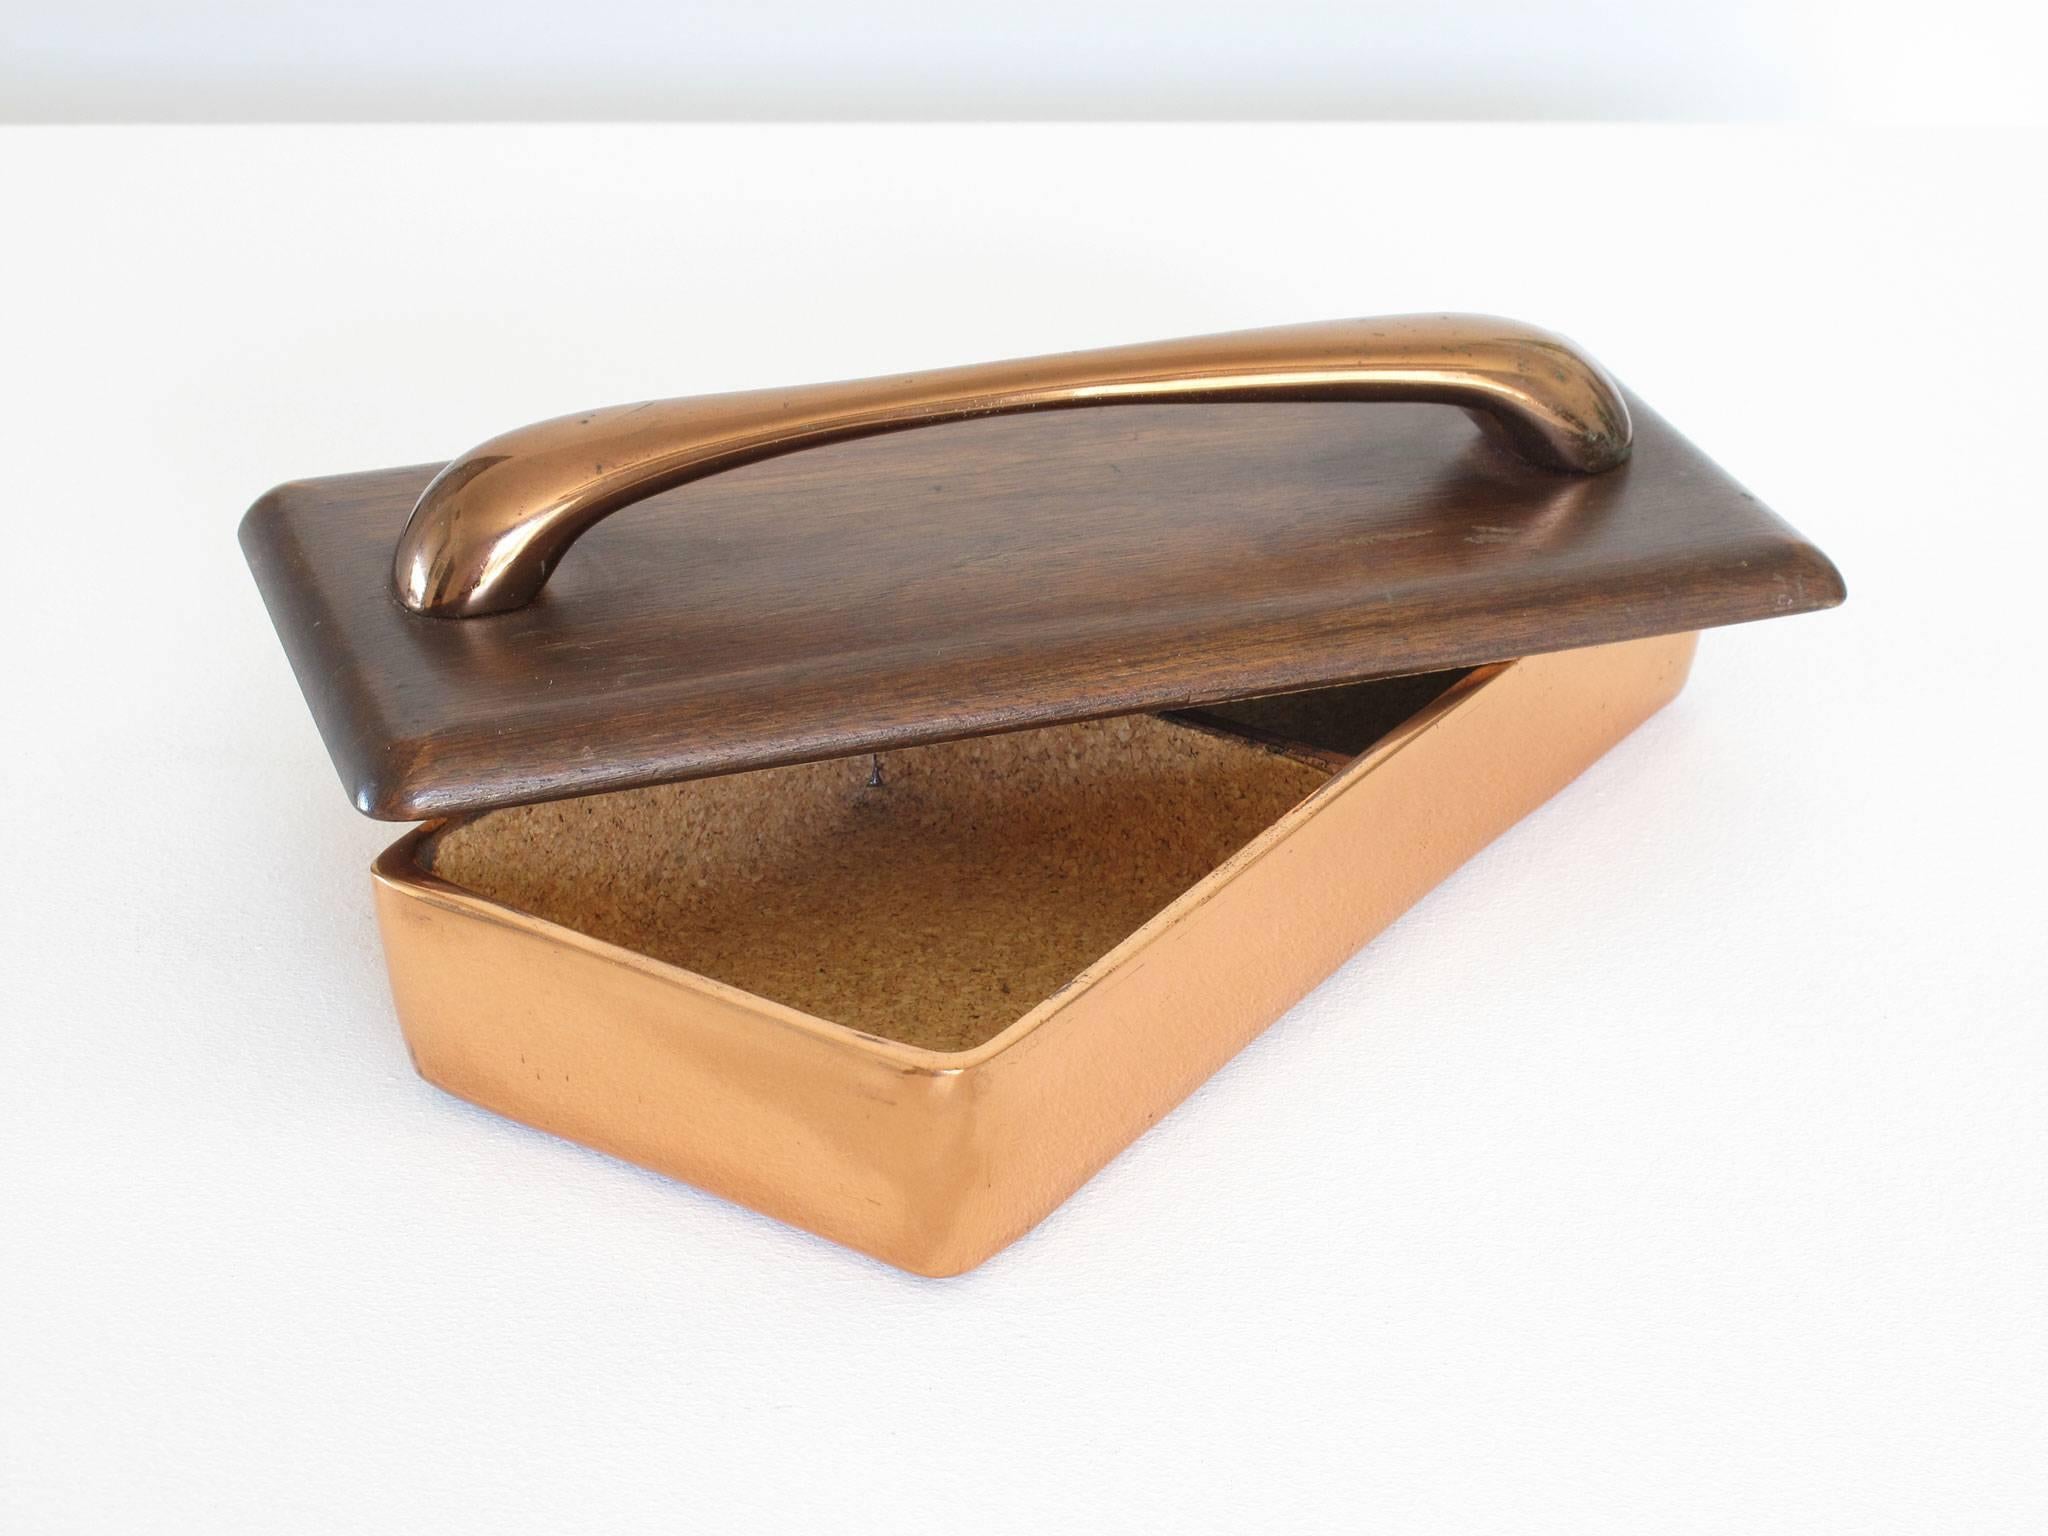 Ben Seibel
box, copper-plated metal, wood, cork and felt,
Jenfred Ware, New York, 1950s.

Copper-plated metal box, cork lined interior with two storage compartments, wood lid with copper handle, a handsome and versatile container for trinkets,